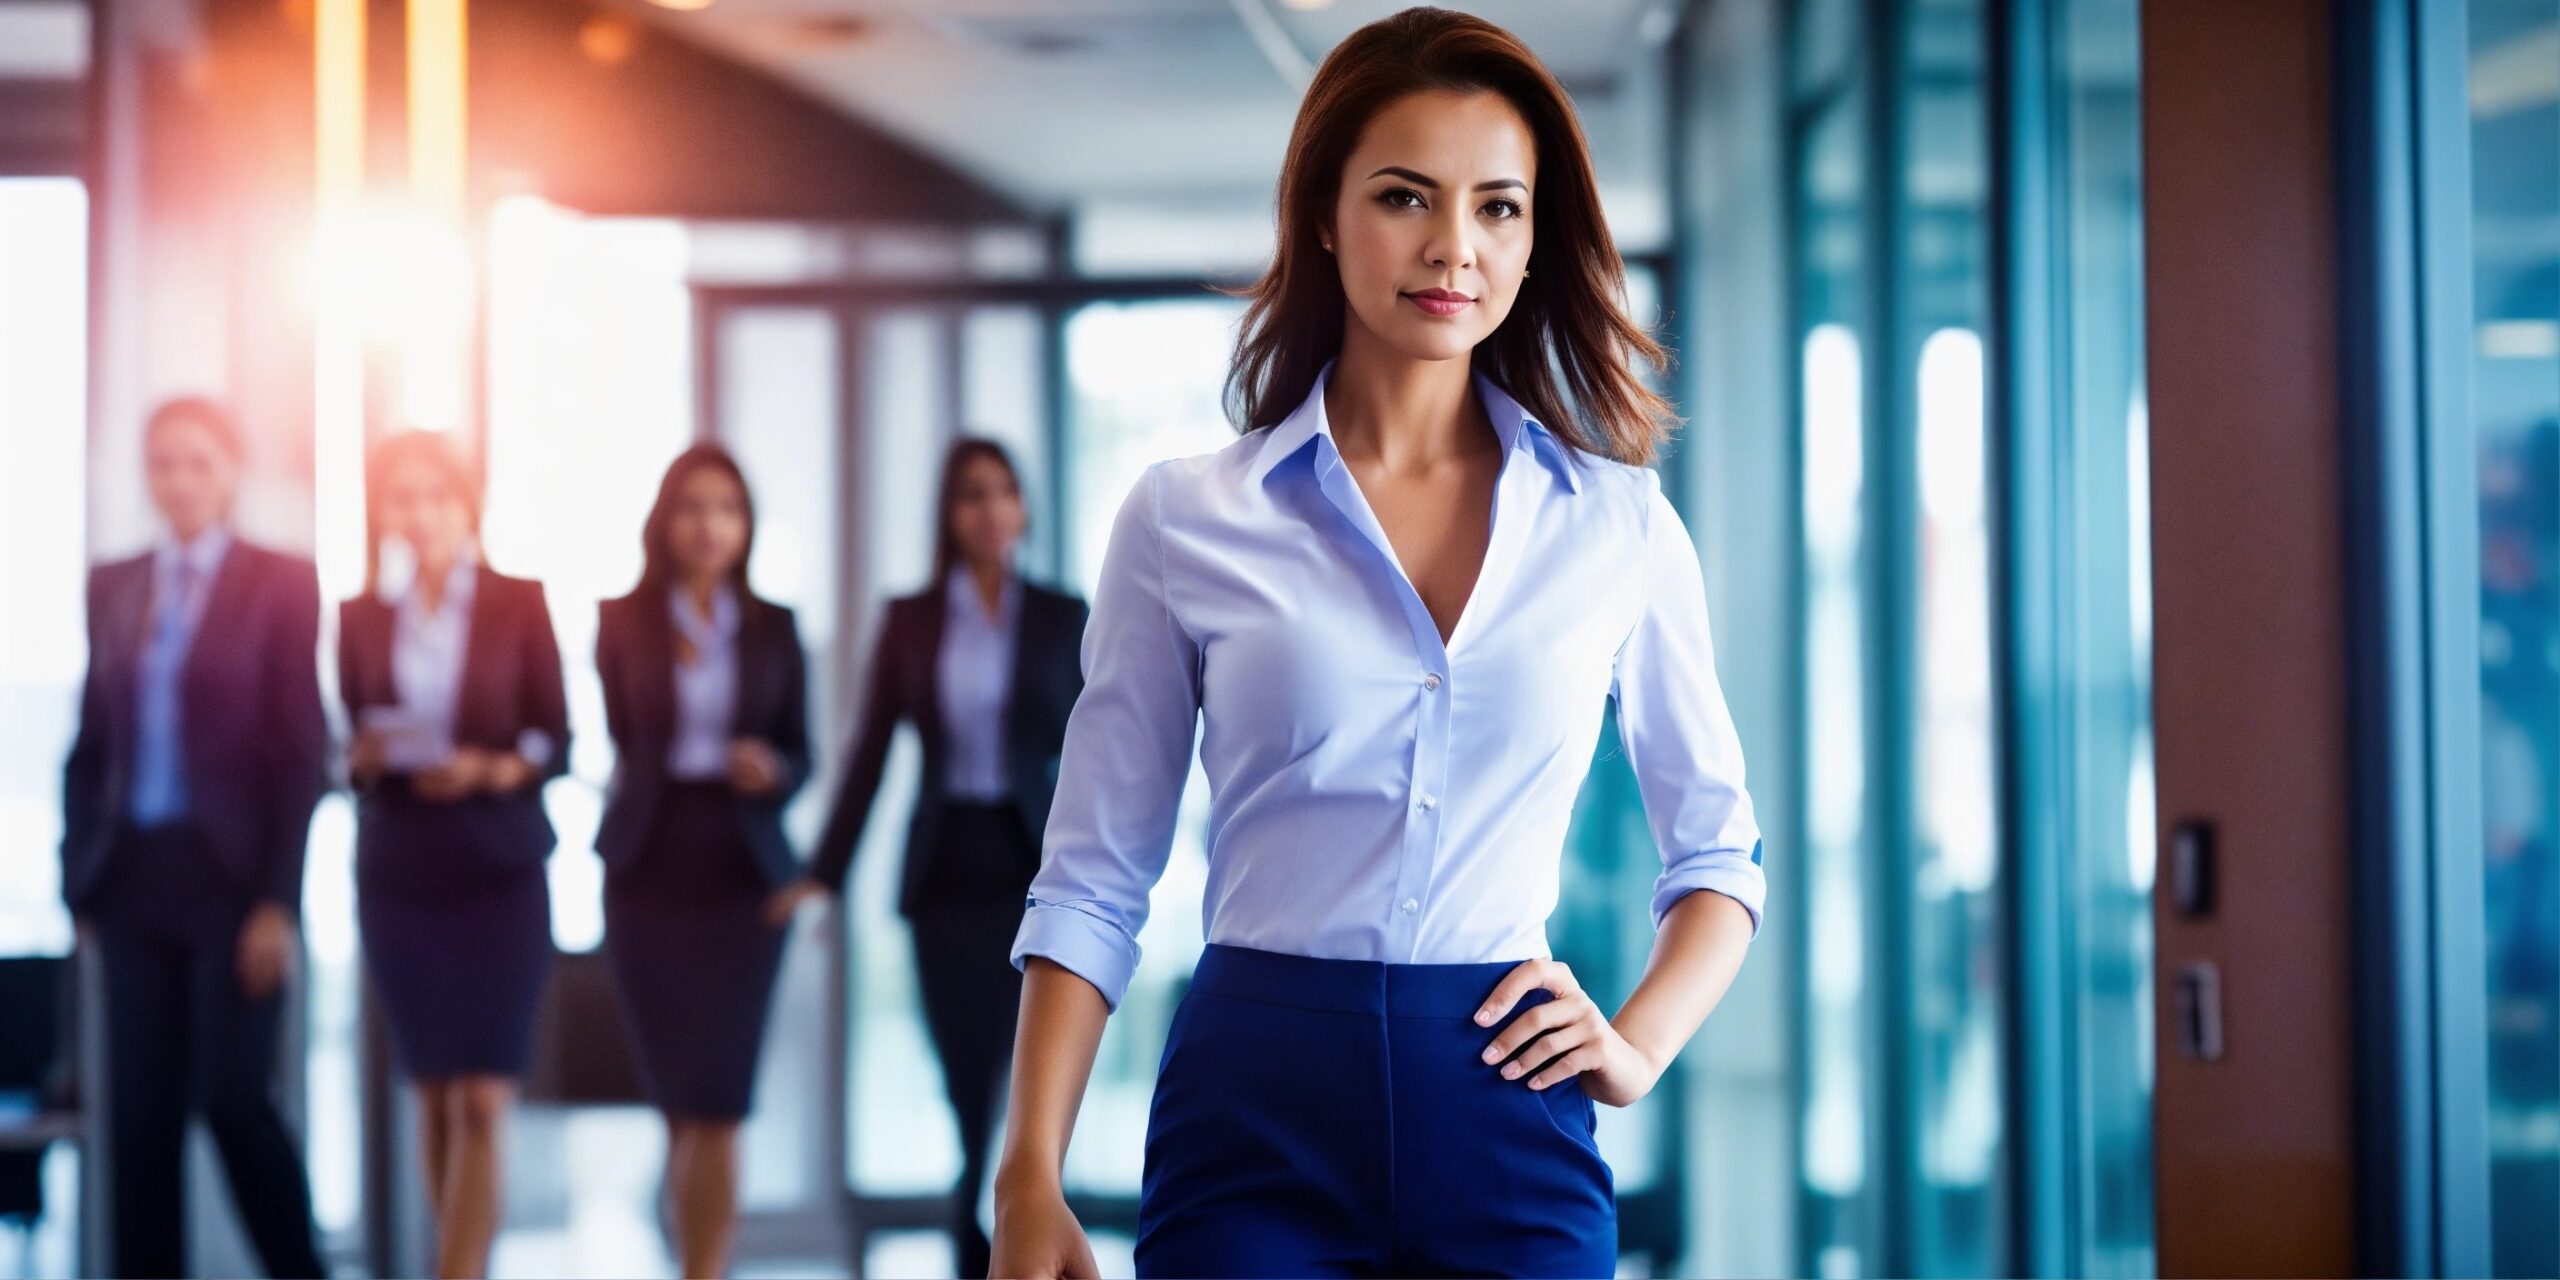 A vibrant image depicts a businesswomen with full business Success